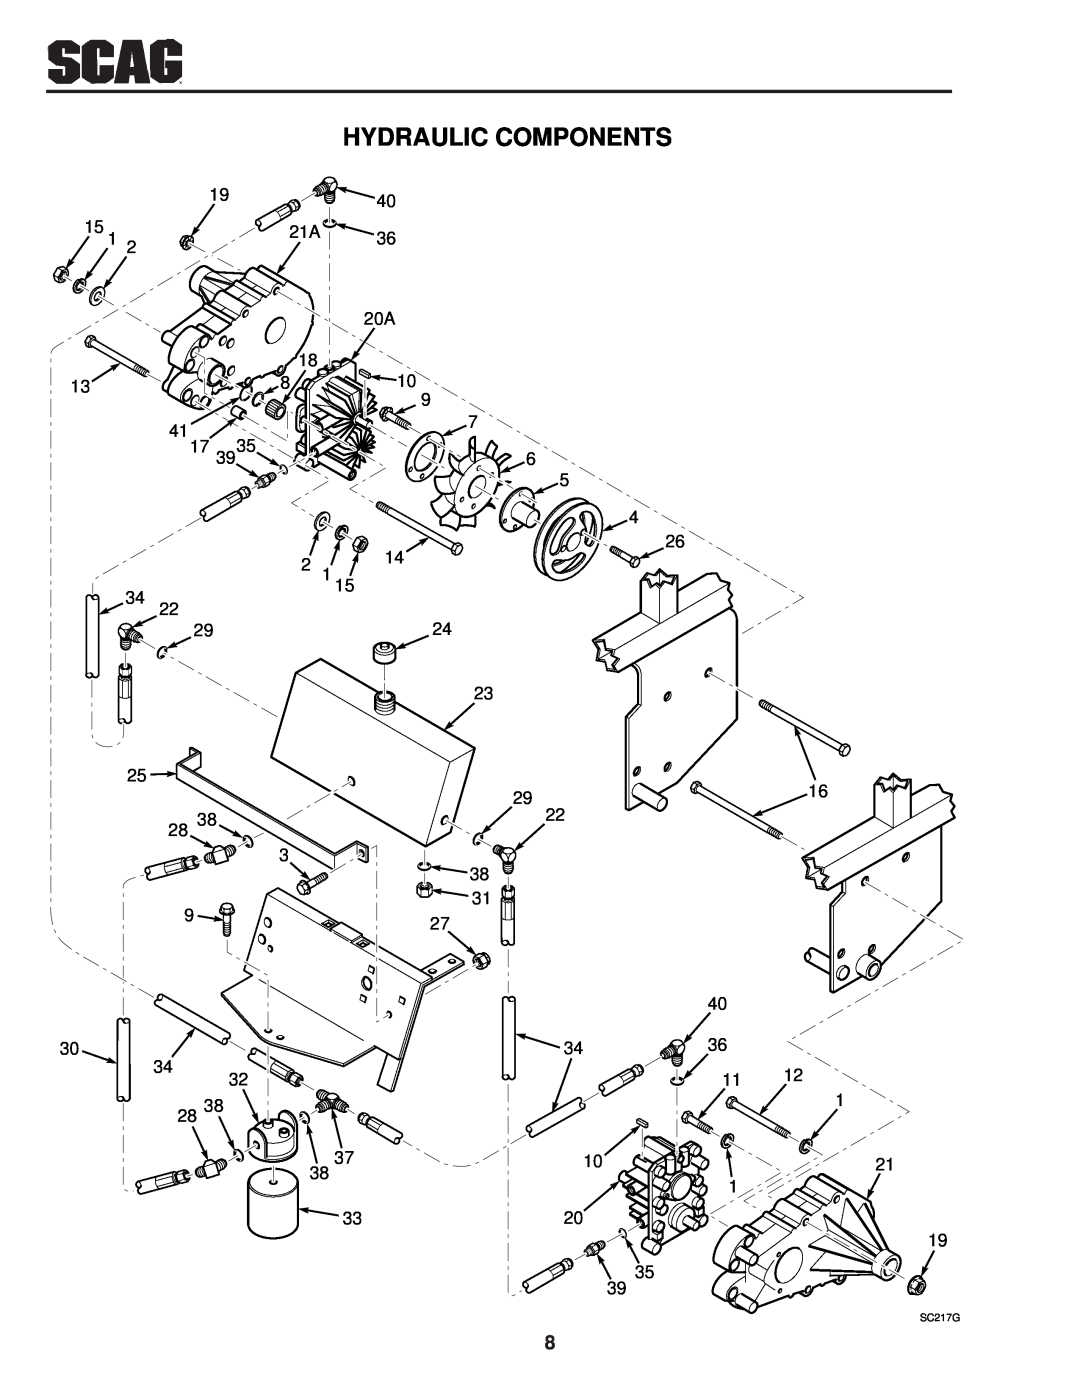 Scag Power Equipment SSZ operating instructions Hydraulic Components, SC217G 